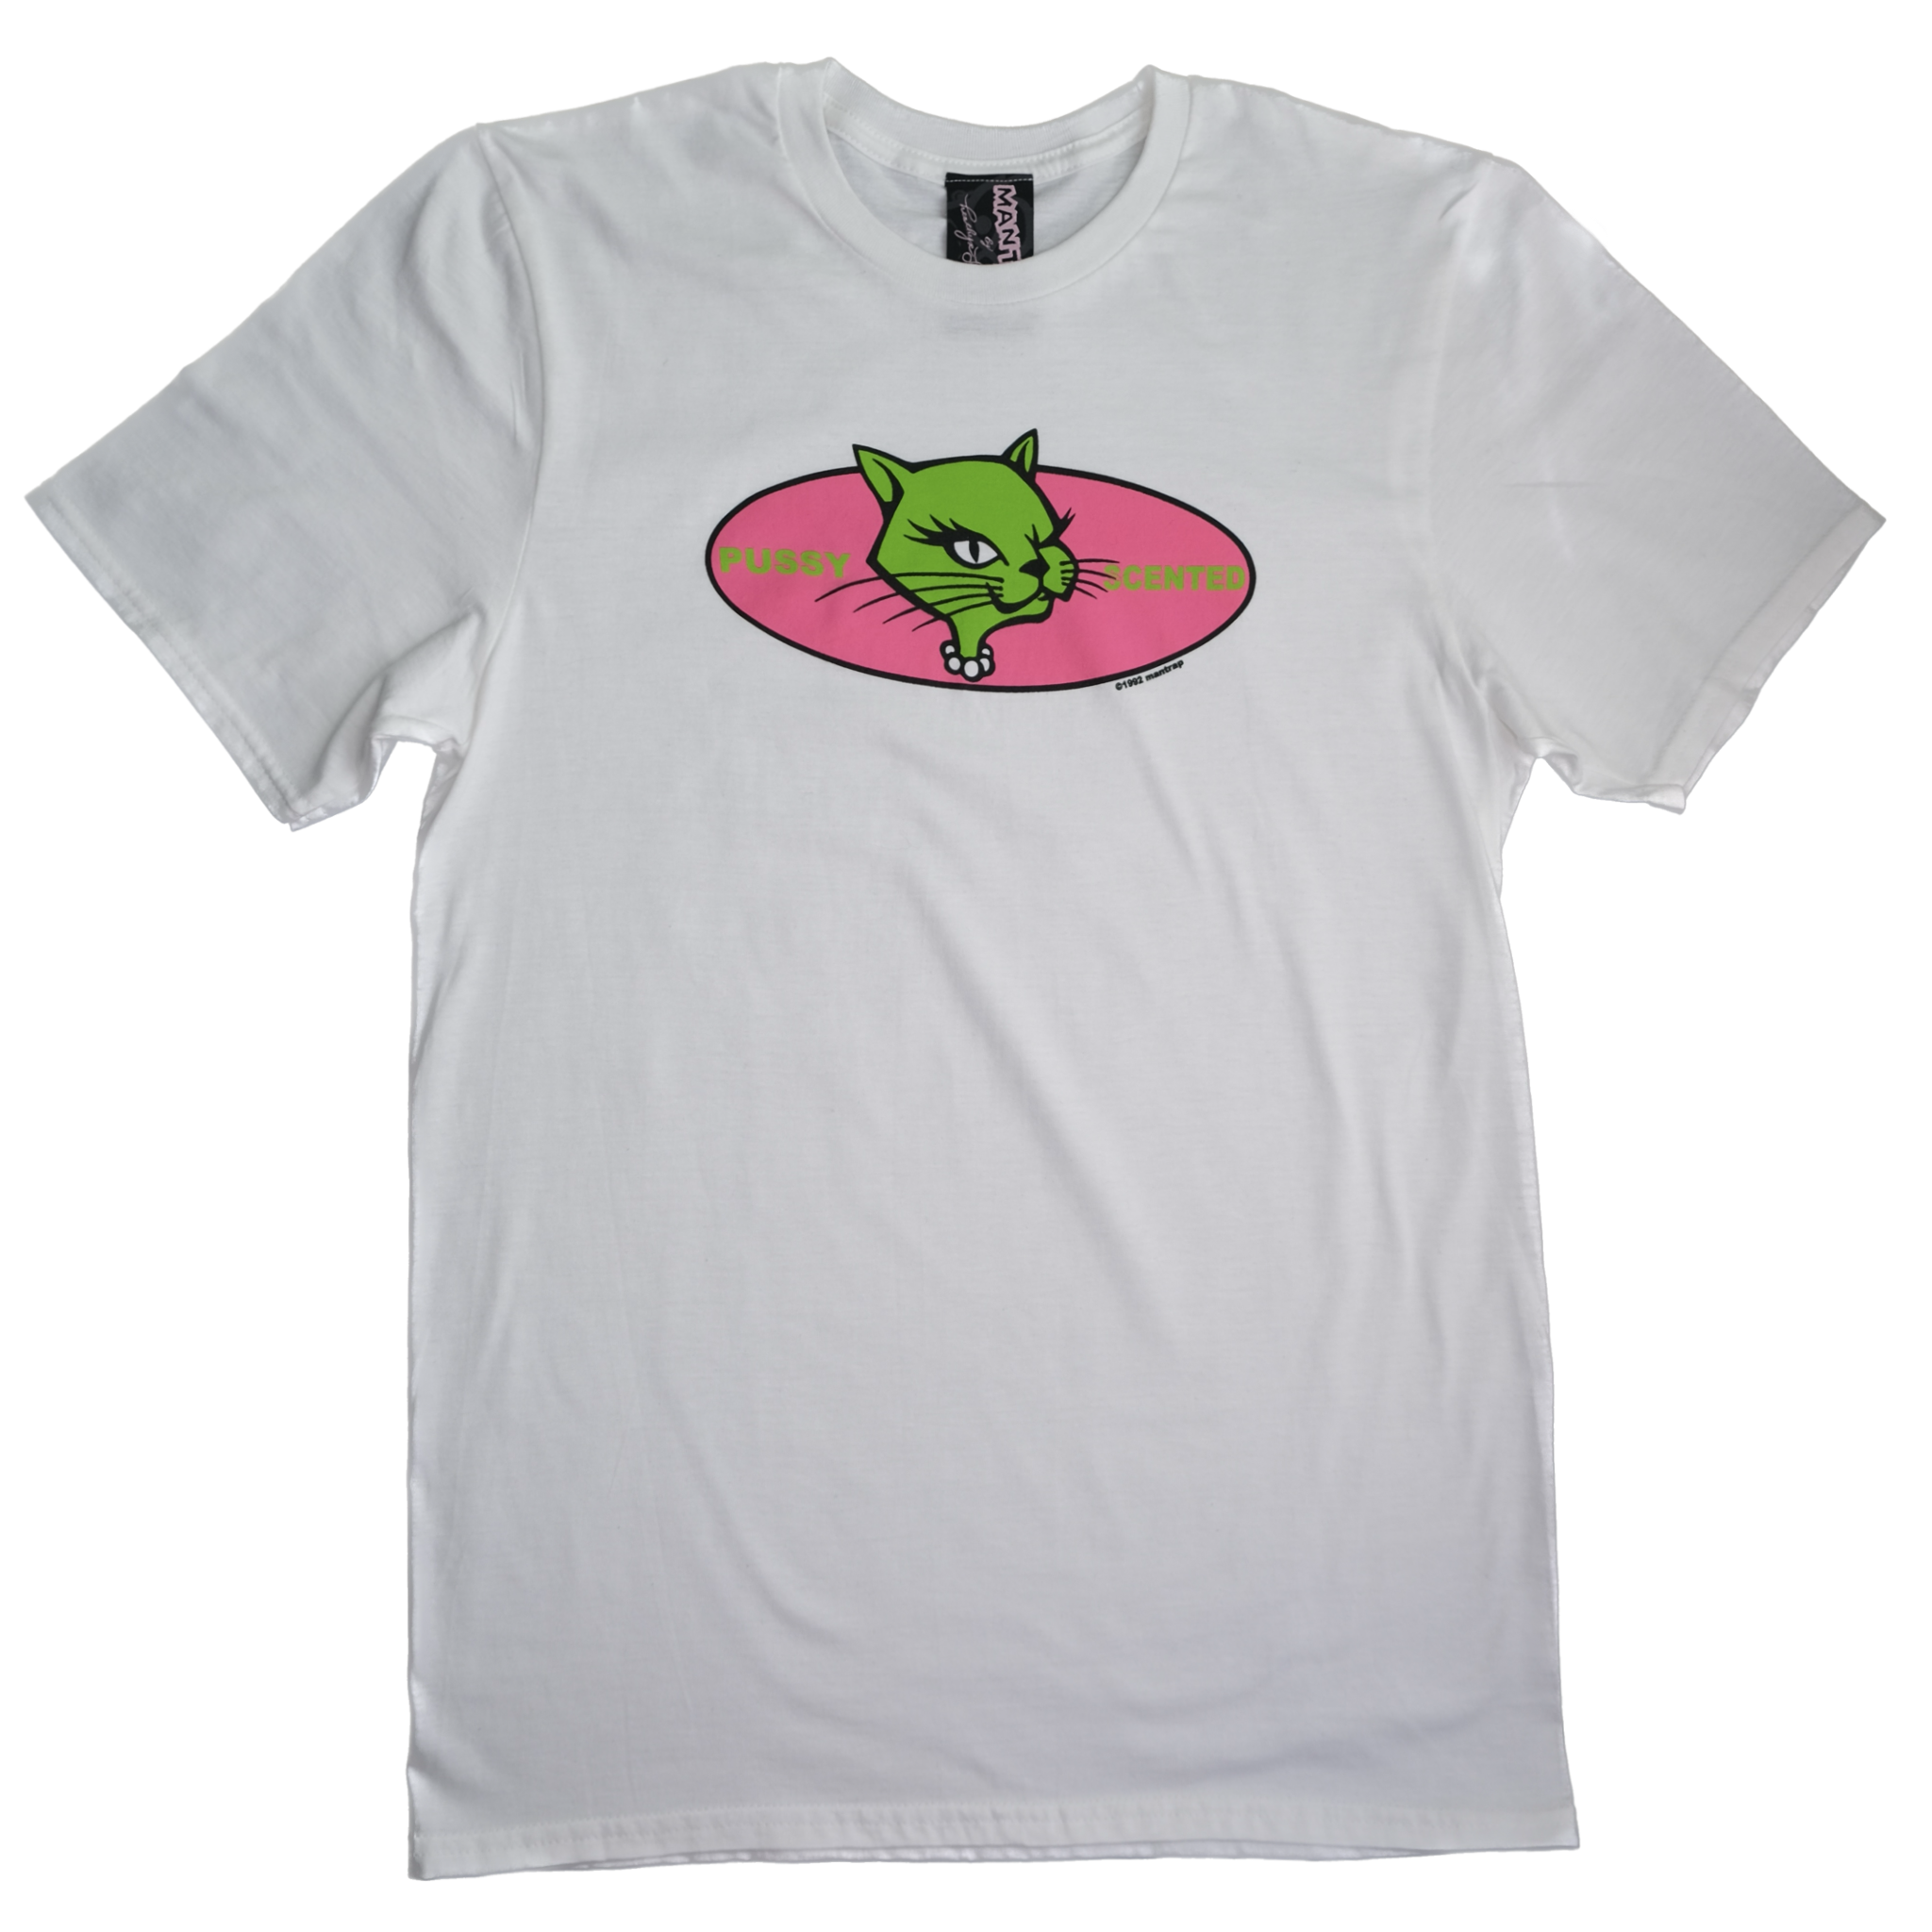 PU$$Y SCENTED TEE.